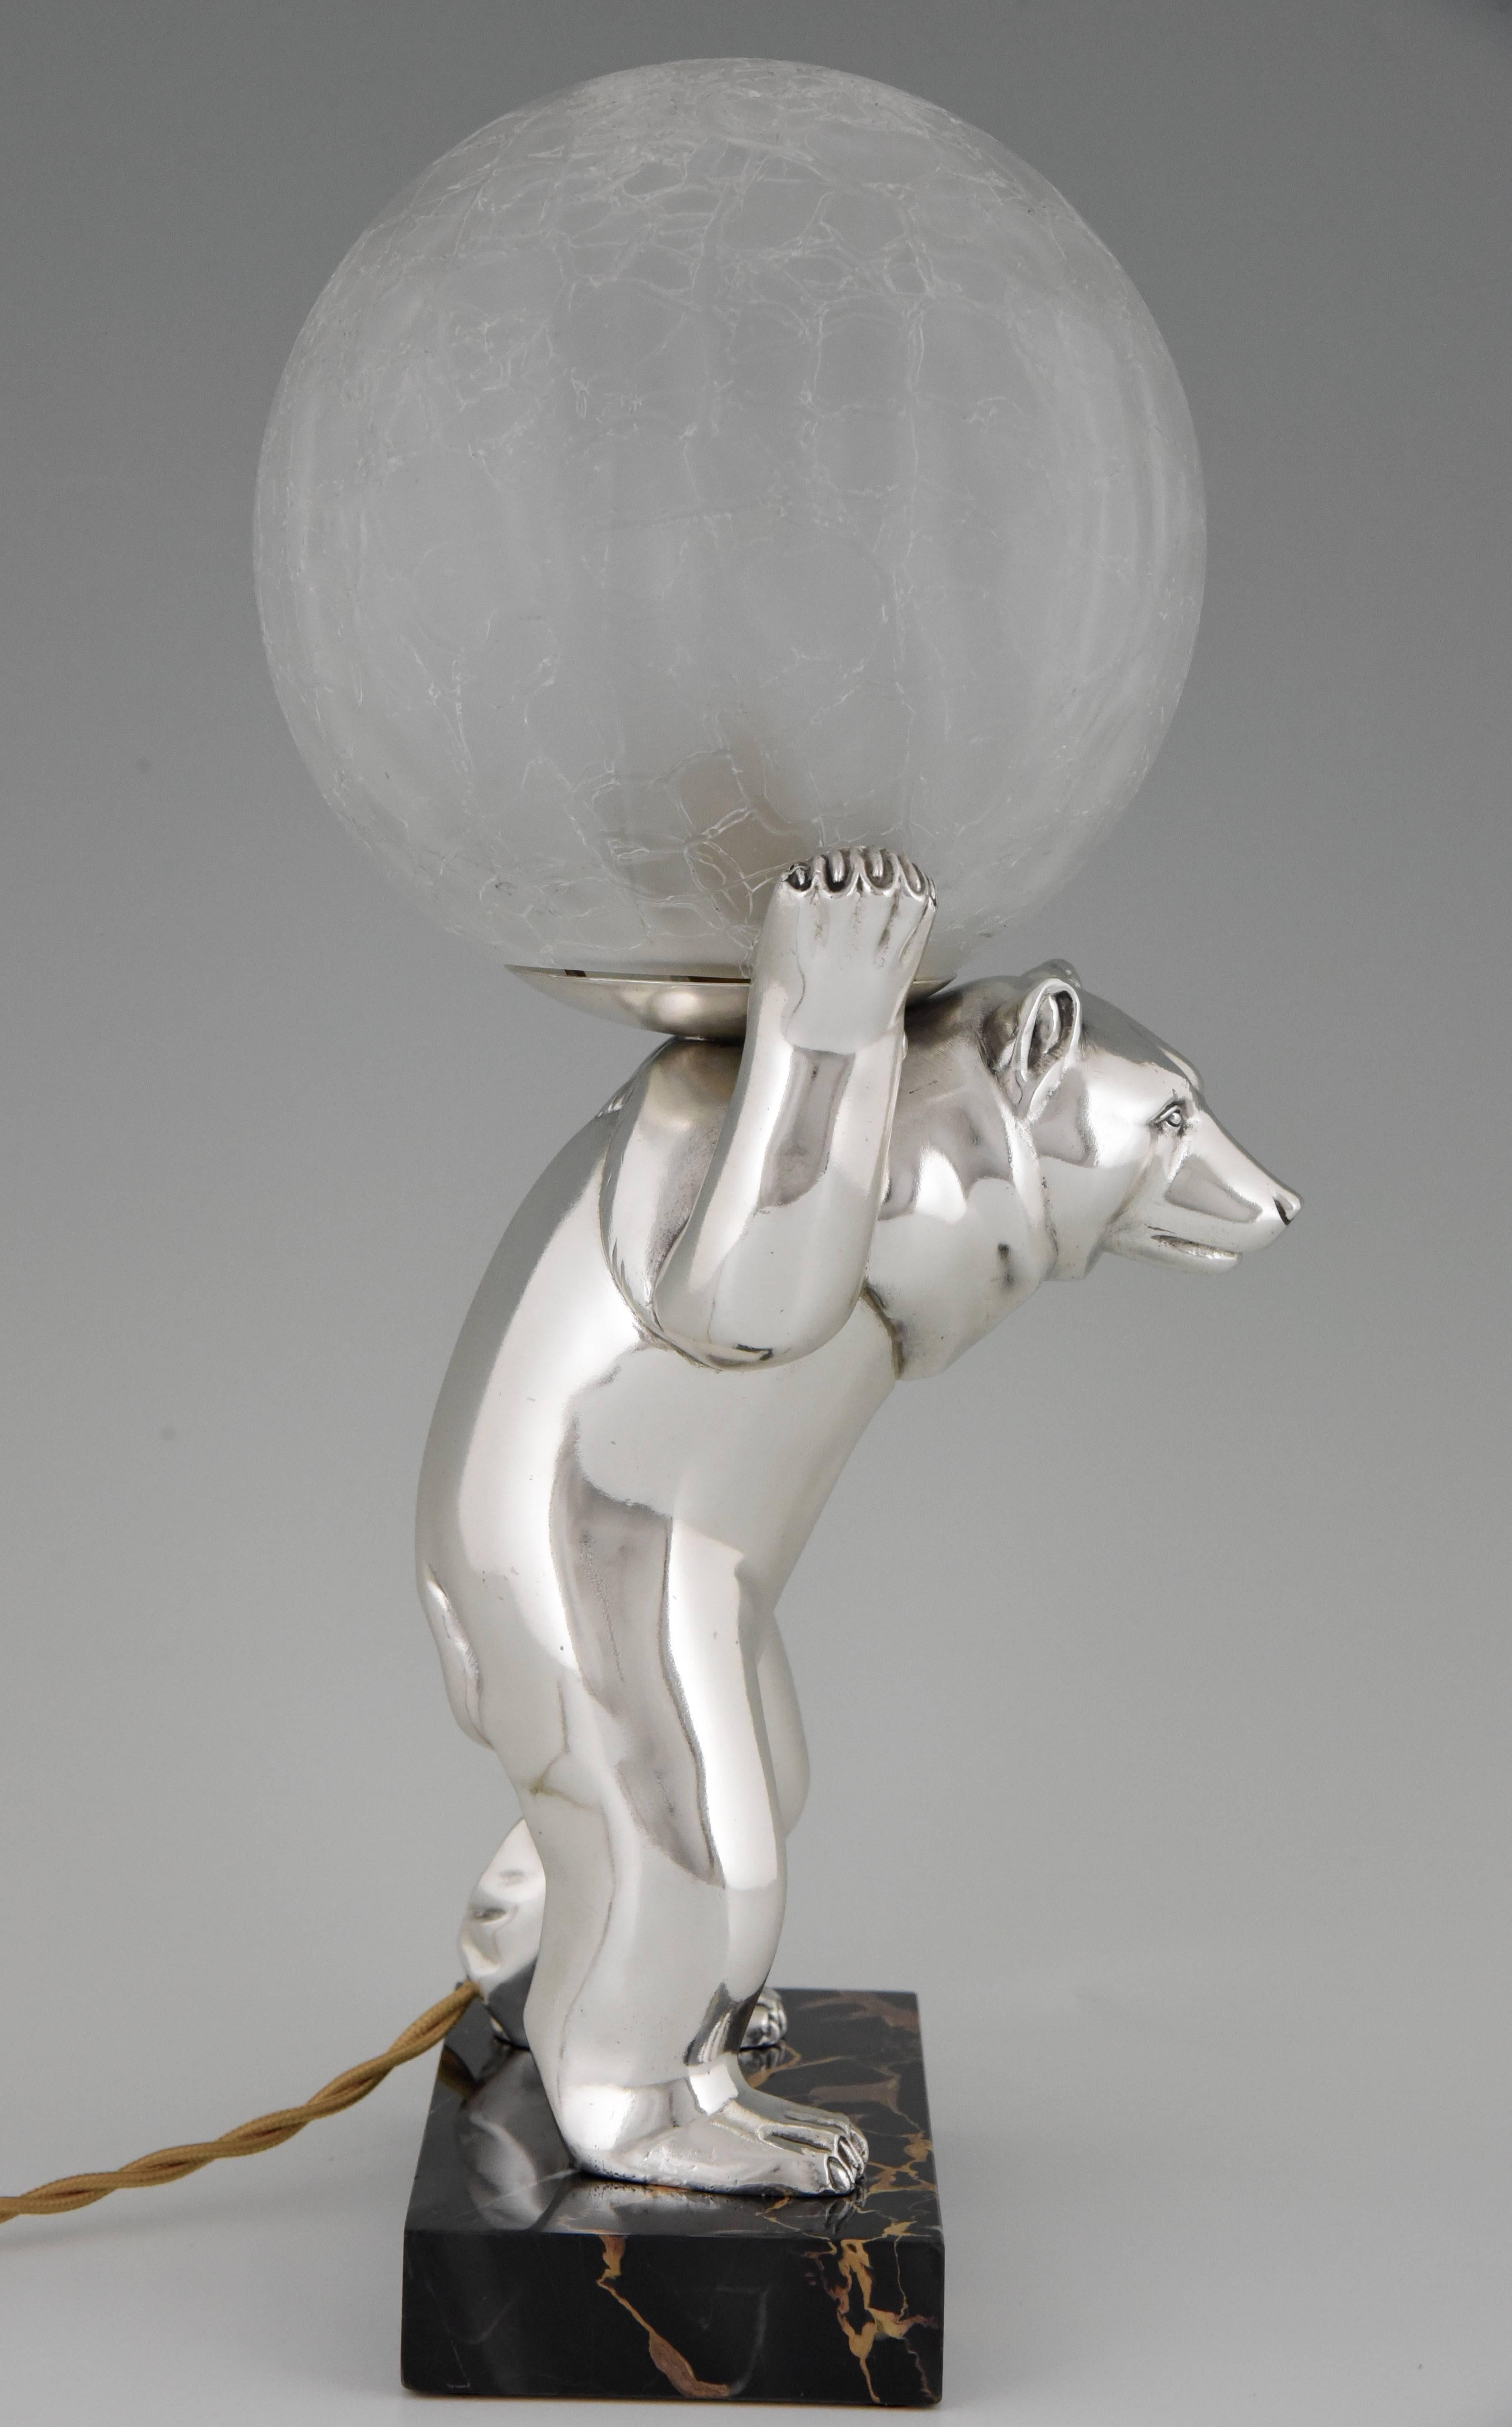 Metal French Art Deco Silvered Bear Lamp with Crackle Glass Globe, Irenee Rochard